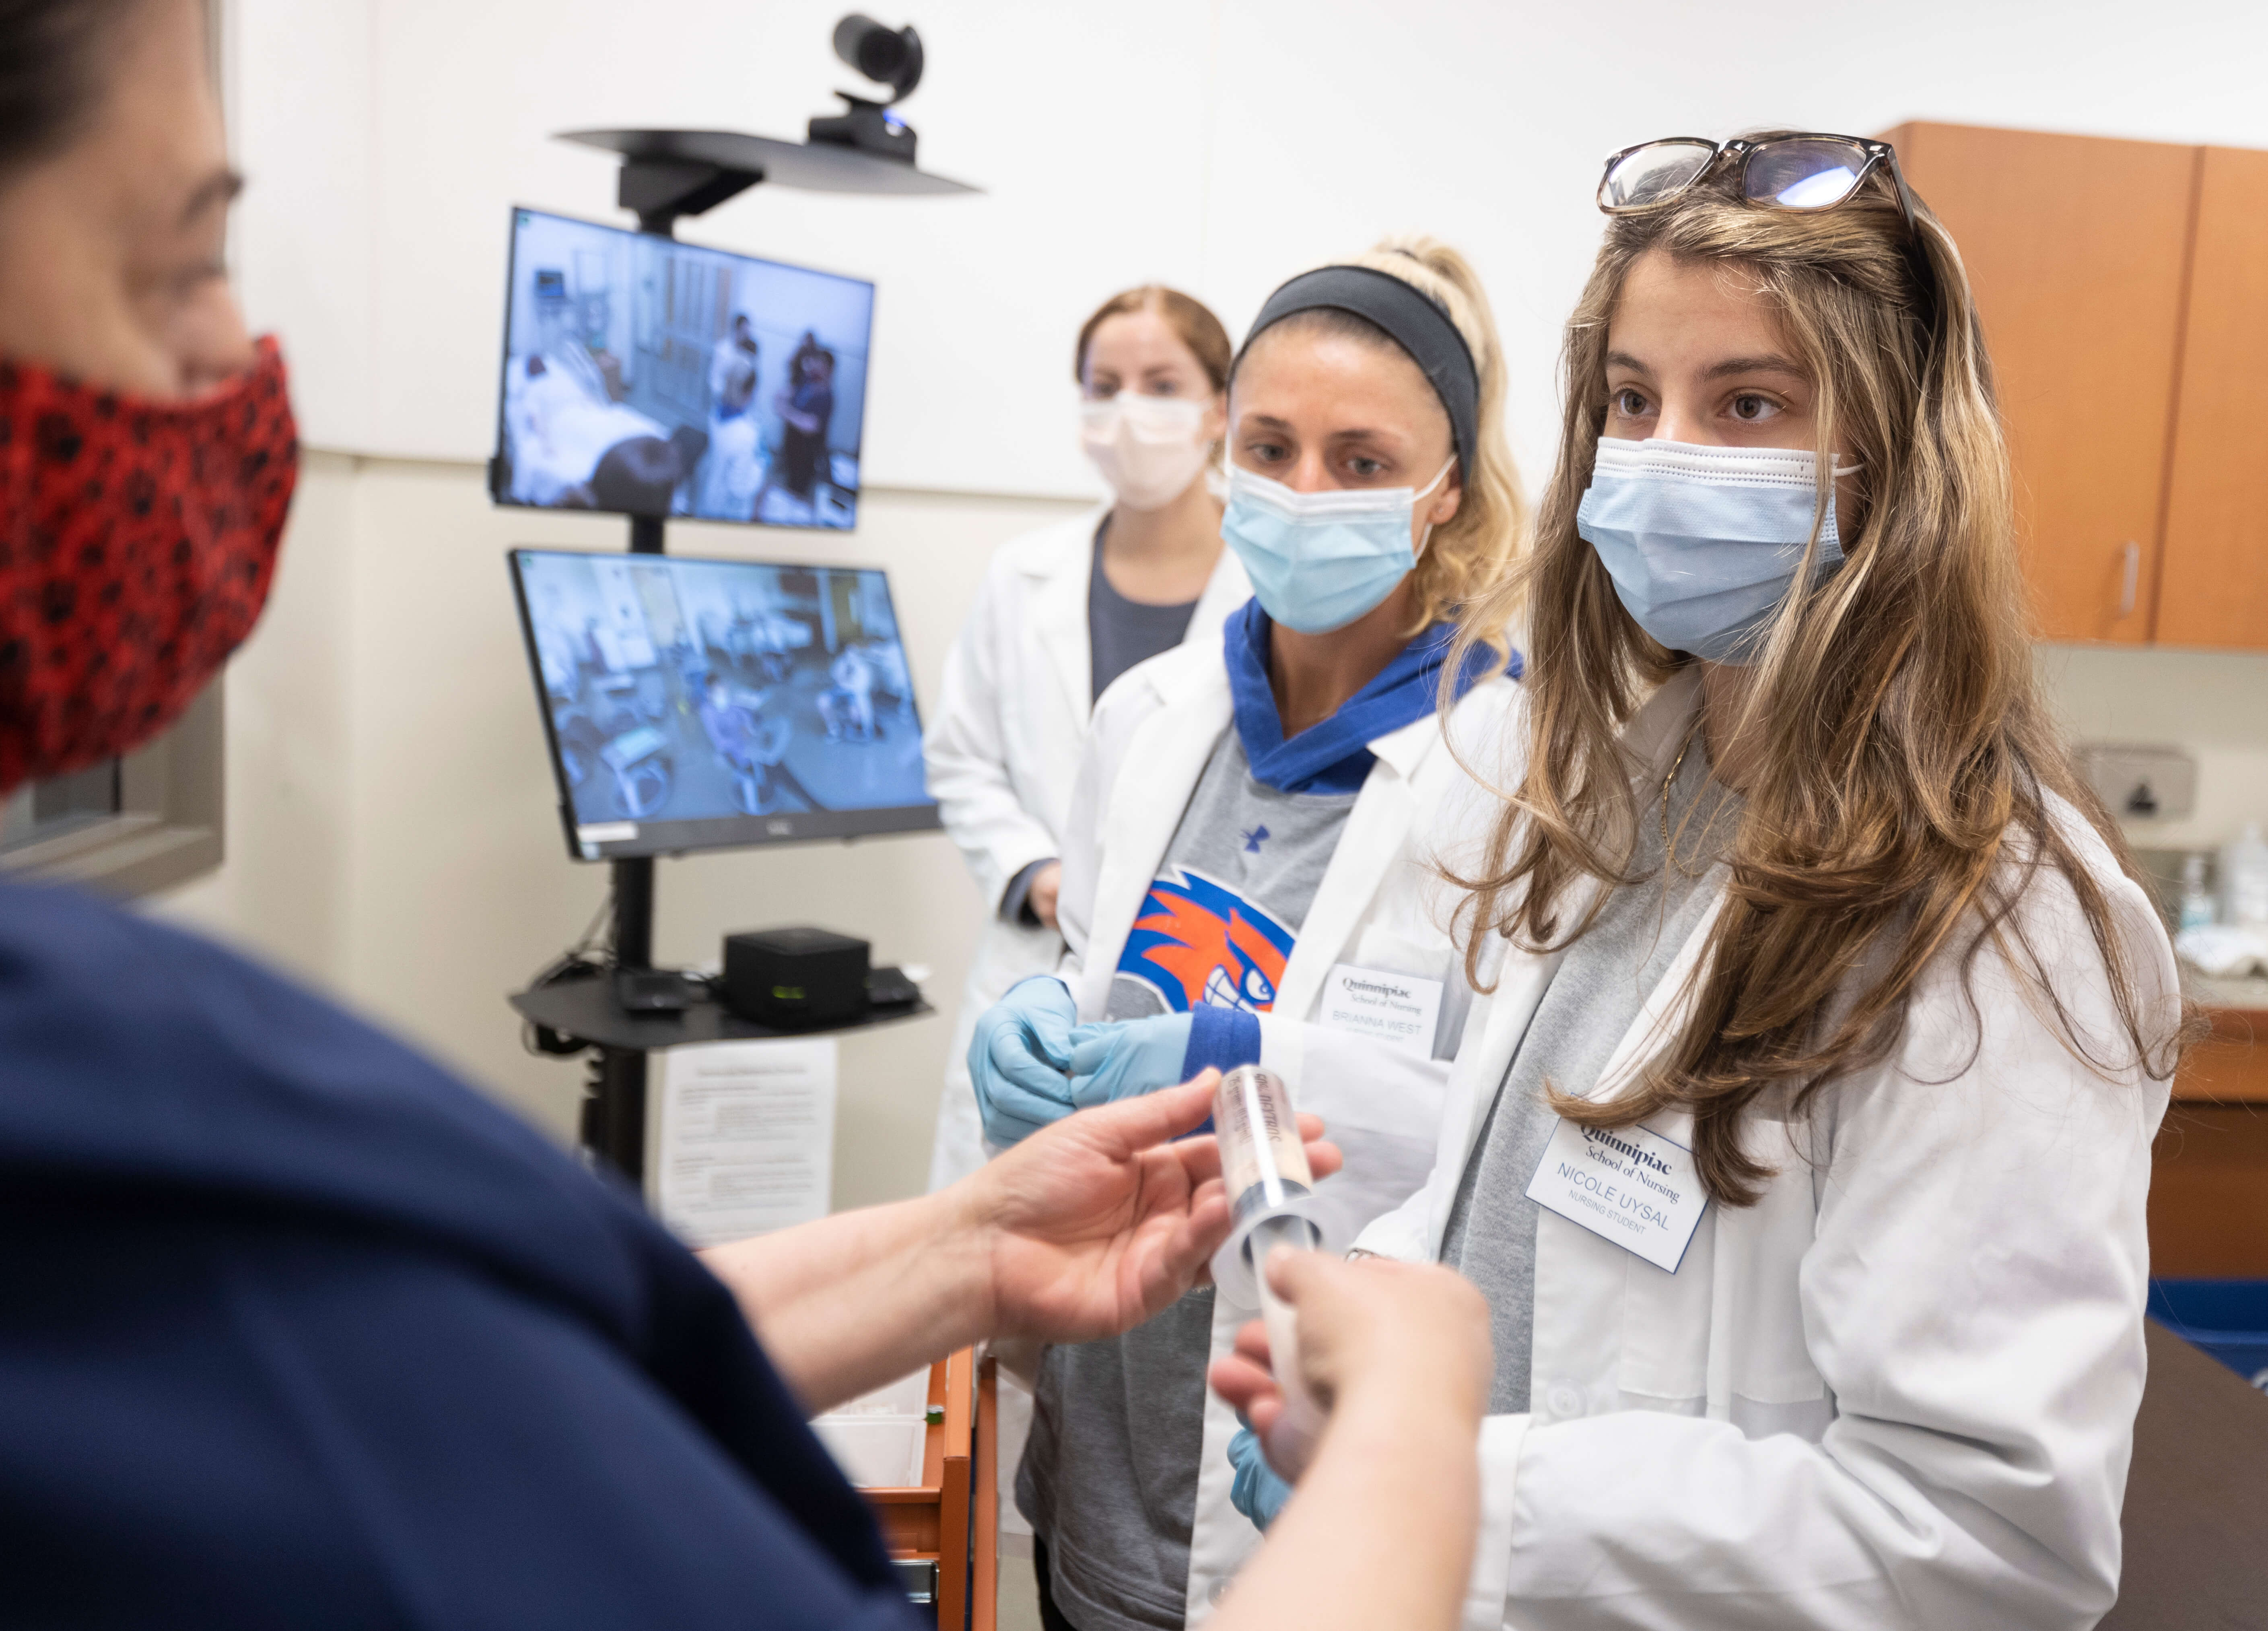 Students in Quinnipiac University’s accelerated nursing program conduct a mock patient assessment Wednesday, June 30, 2021